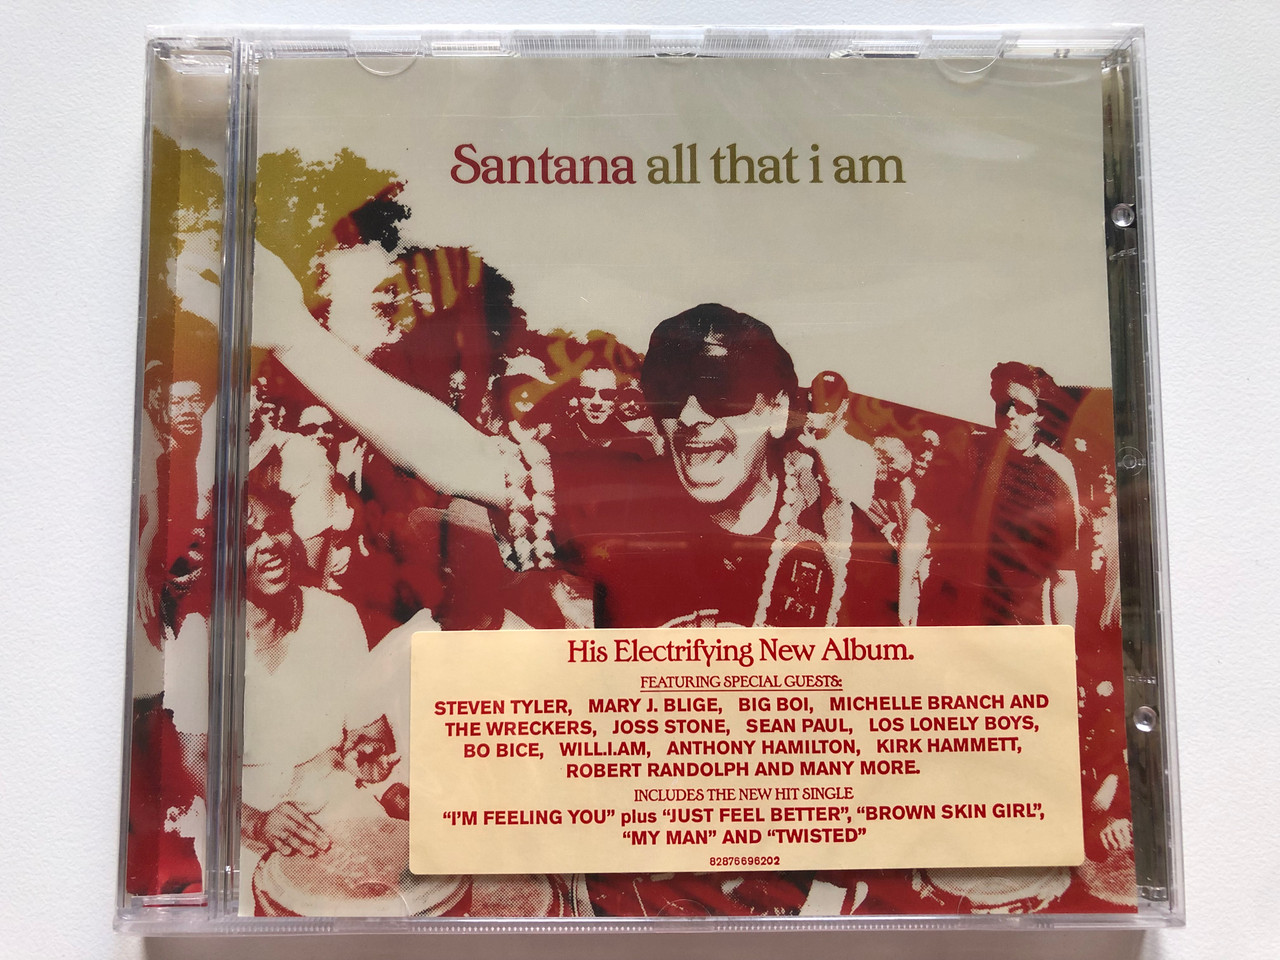 https://cdn10.bigcommerce.com/s-62bdpkt7pb/products/0/images/224572/Santana_All_That_I_Am_His_Electrifying_New_Album_Featuring_Special_Guests_Steven_Tyler_Mary_J._Blige_Big_Boi_Michelle_Branch_And_The_Wreckers_Joss_Stone_Sean_Paul_Los_Lonely_Boys_B_1__48849.1650874040.1280.1280.JPG?c=2&_gl=1*16ch7ie*_ga*MjA2NTIxMjE2MC4xNTkwNTEyNTMy*_ga_WS2VZYPC6G*MTY1MDg2Nzk5Ni4zNjcuMS4xNjUwODczNjUzLjM2